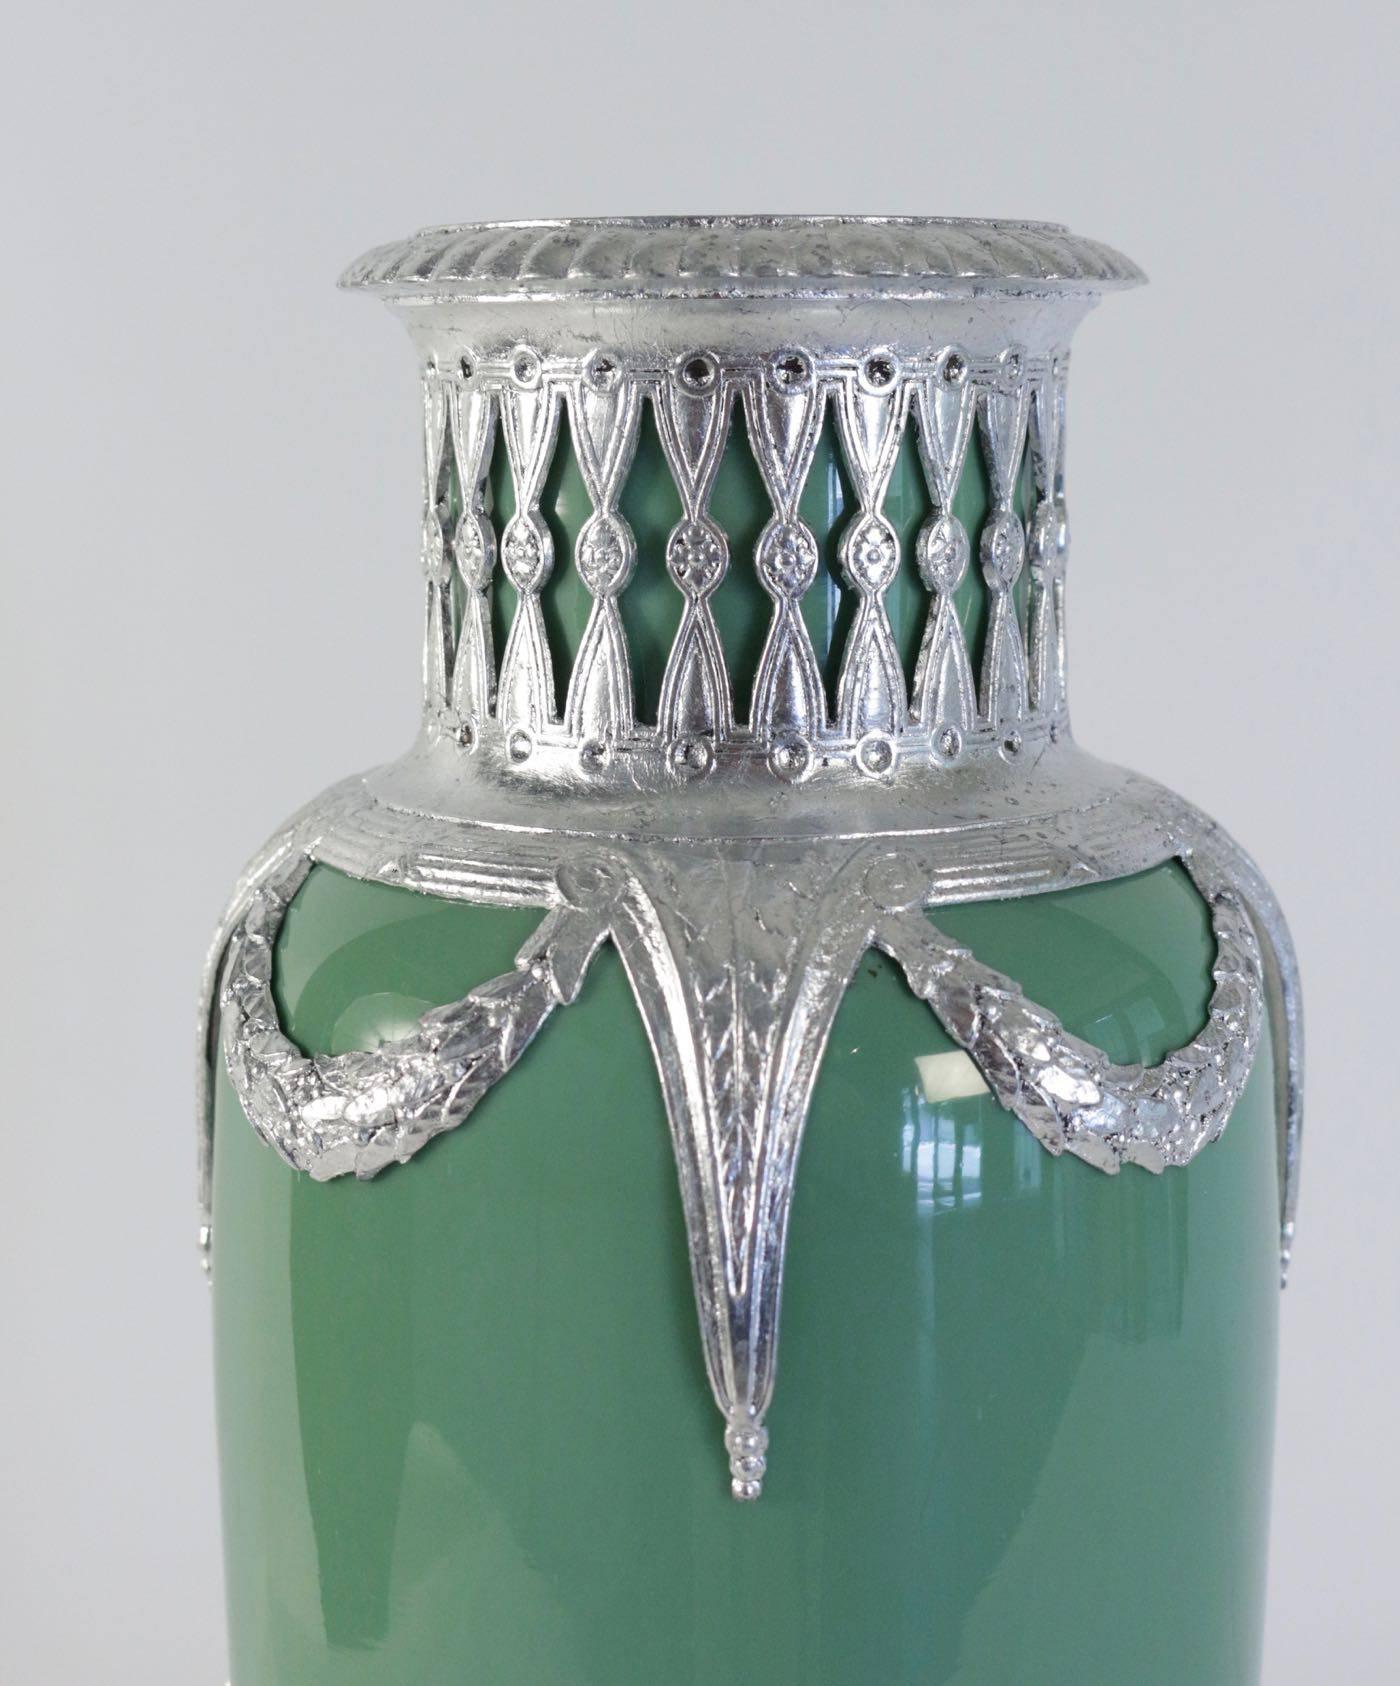 Celadon Vase in Faience, Silver Plate and Silver Leaf, 19th Century Period 1